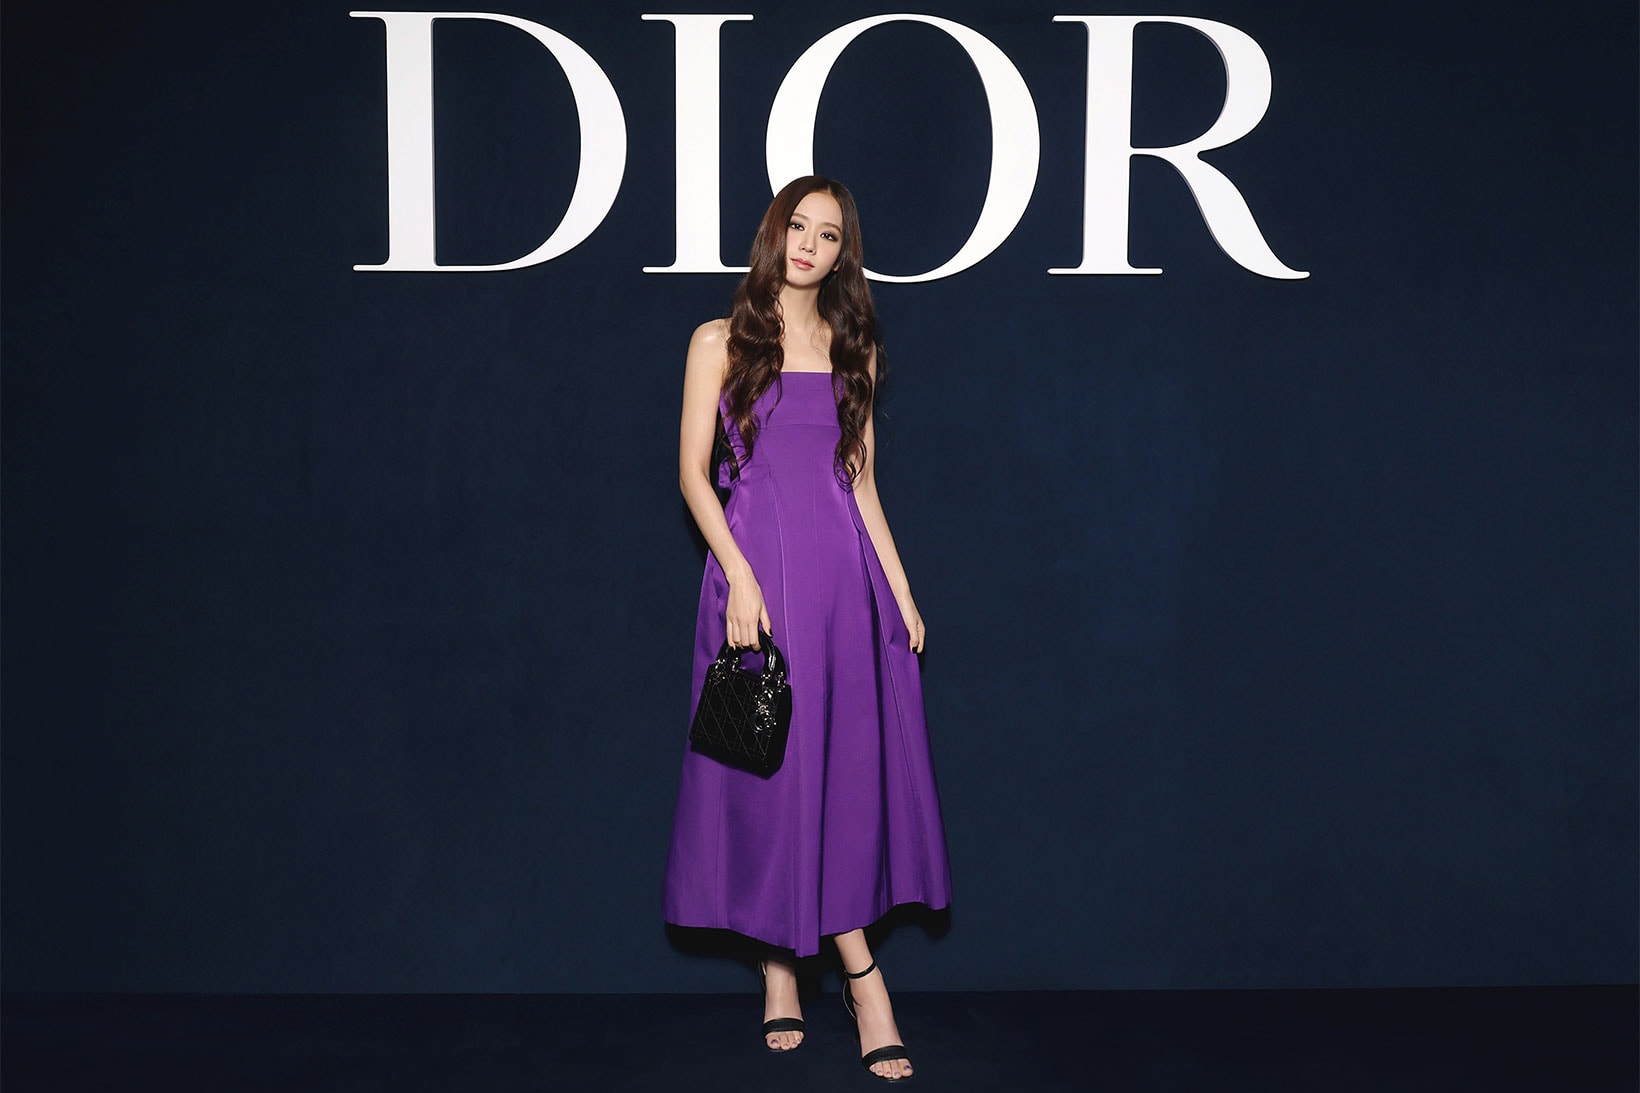 Blackpink's Jisoo Goes Sheer in Dior Look at Couture Fashion Show